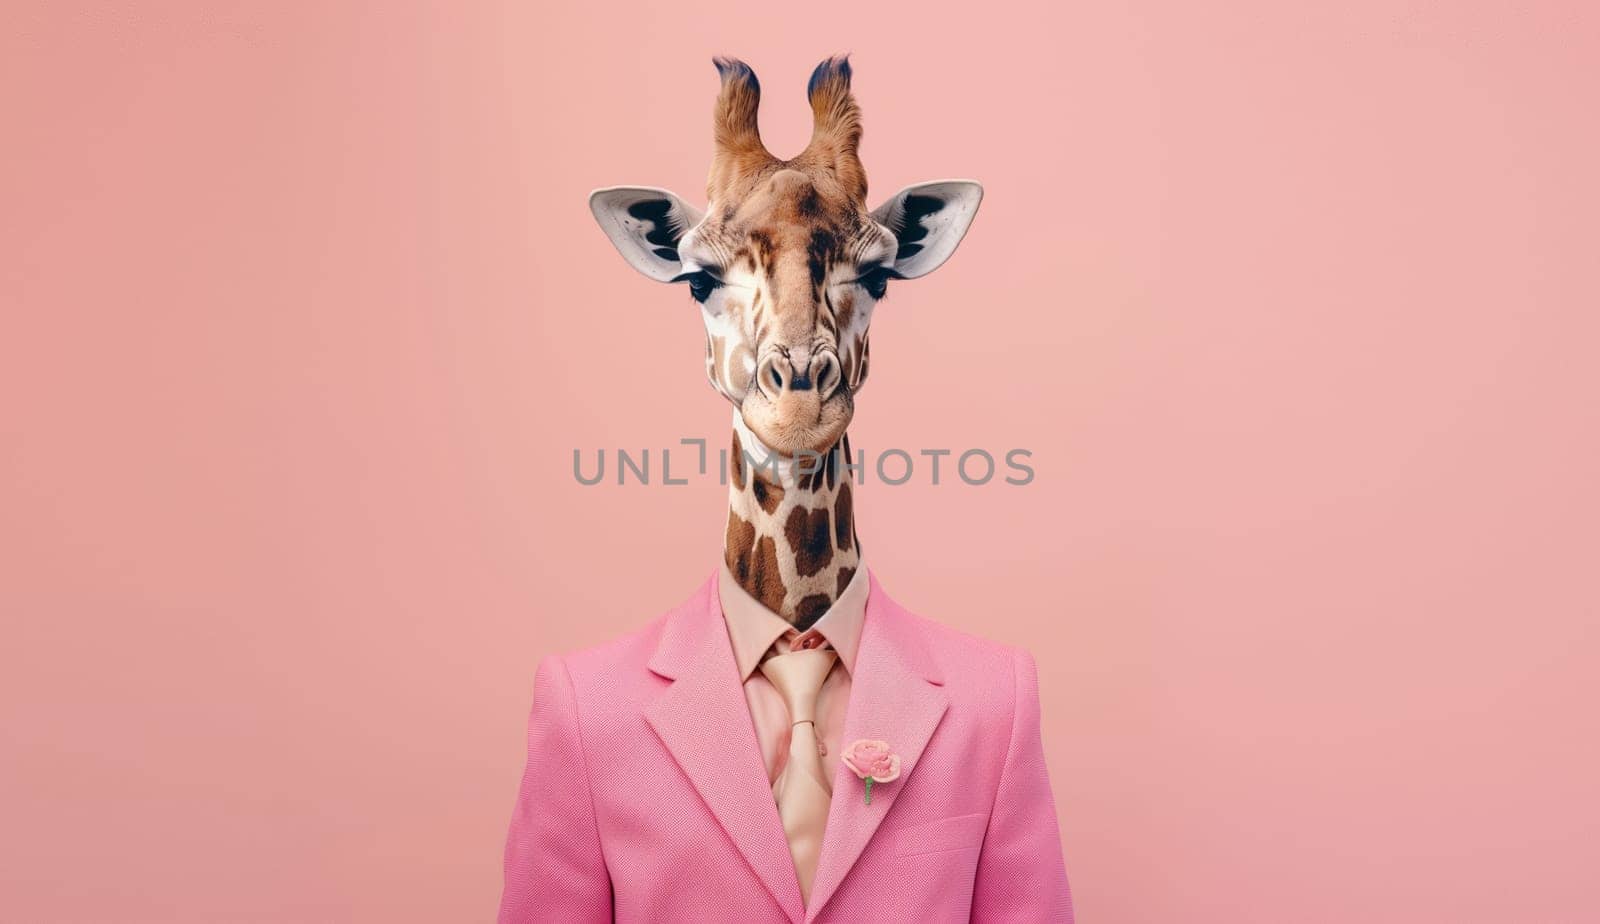 Stylish funny giraffe in a suit looking at the camera on a pink background, animal, creative concept by Rohappy